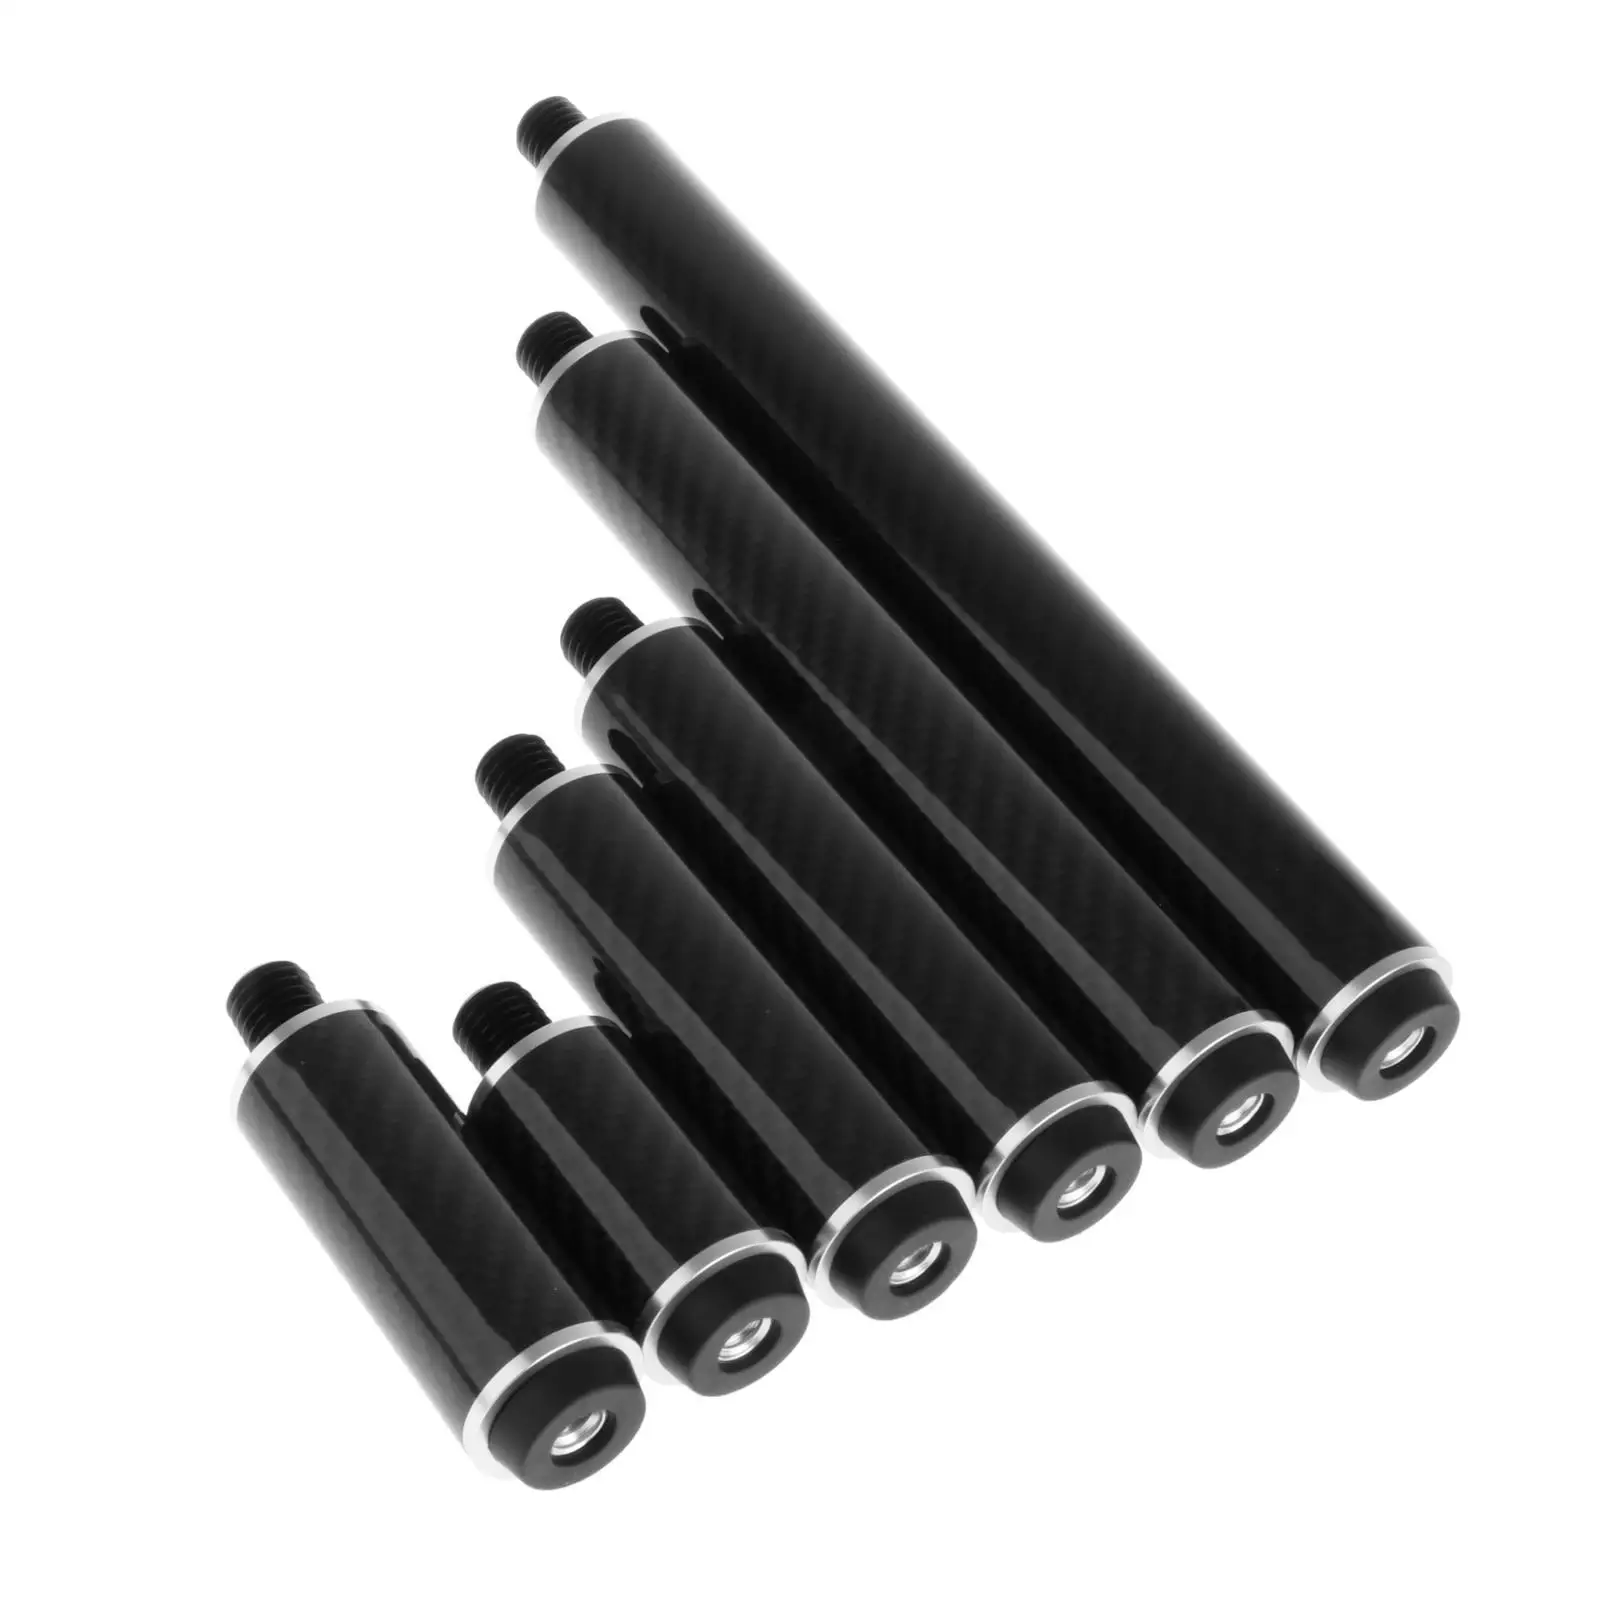 Billiards Pool Cue Extension, Snooker Cue Extended Cue Extended Attachment Cue End Extended with Back Cap for Beginners Games